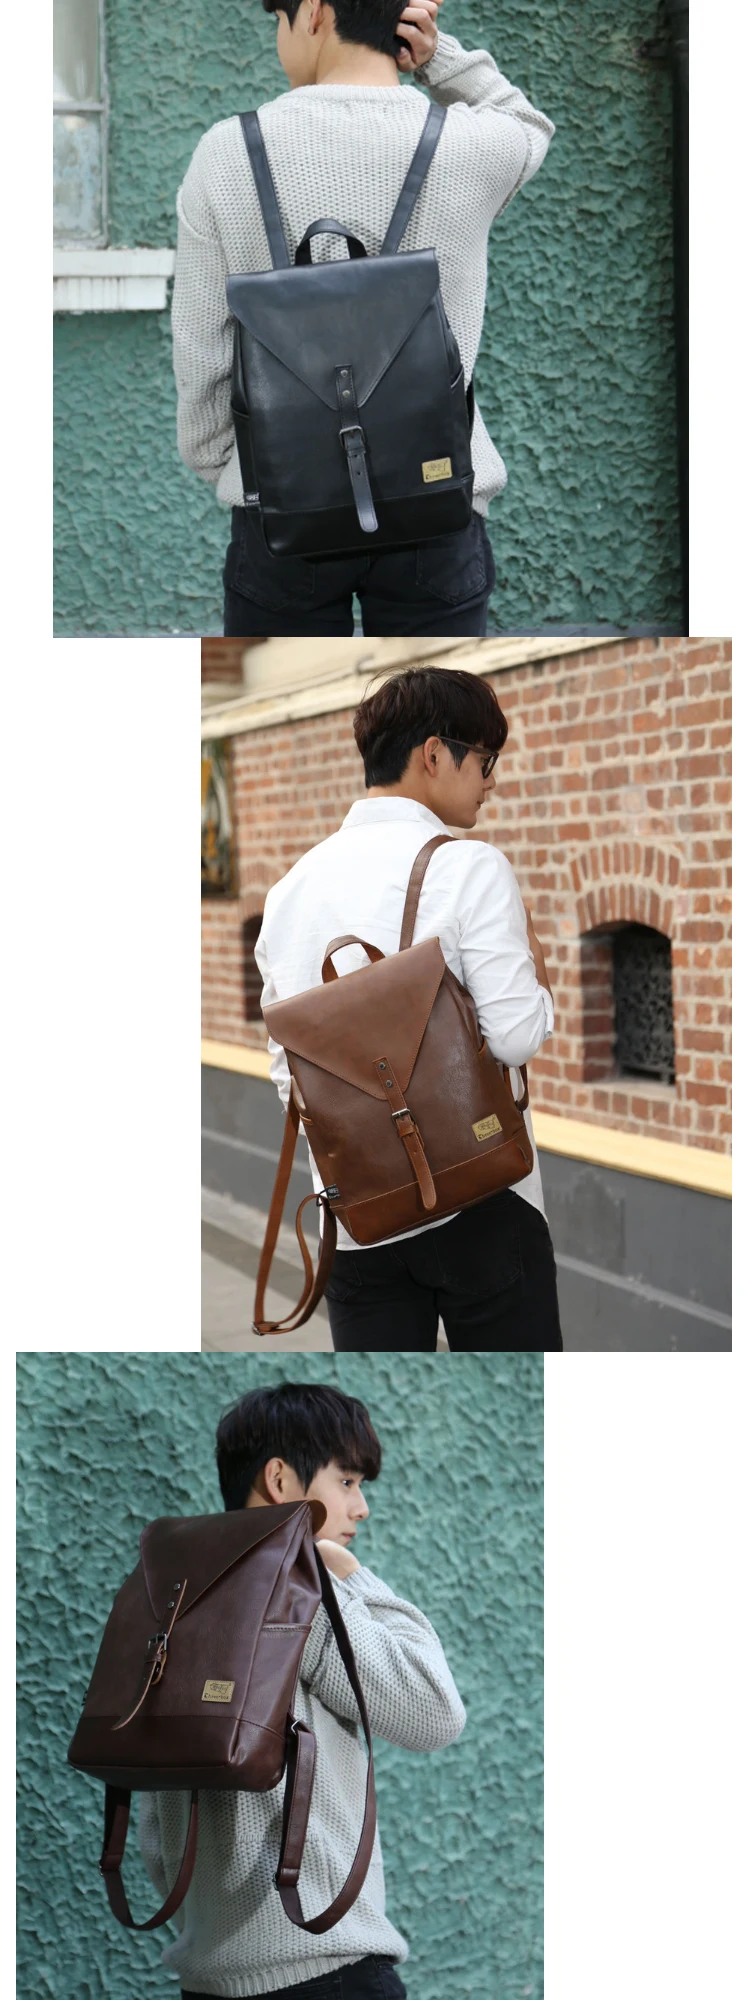 Osgoodway 2020 High Quality Leather Women Fashion Bagpack Backpack Mens Business Travel School Bags Backpacks